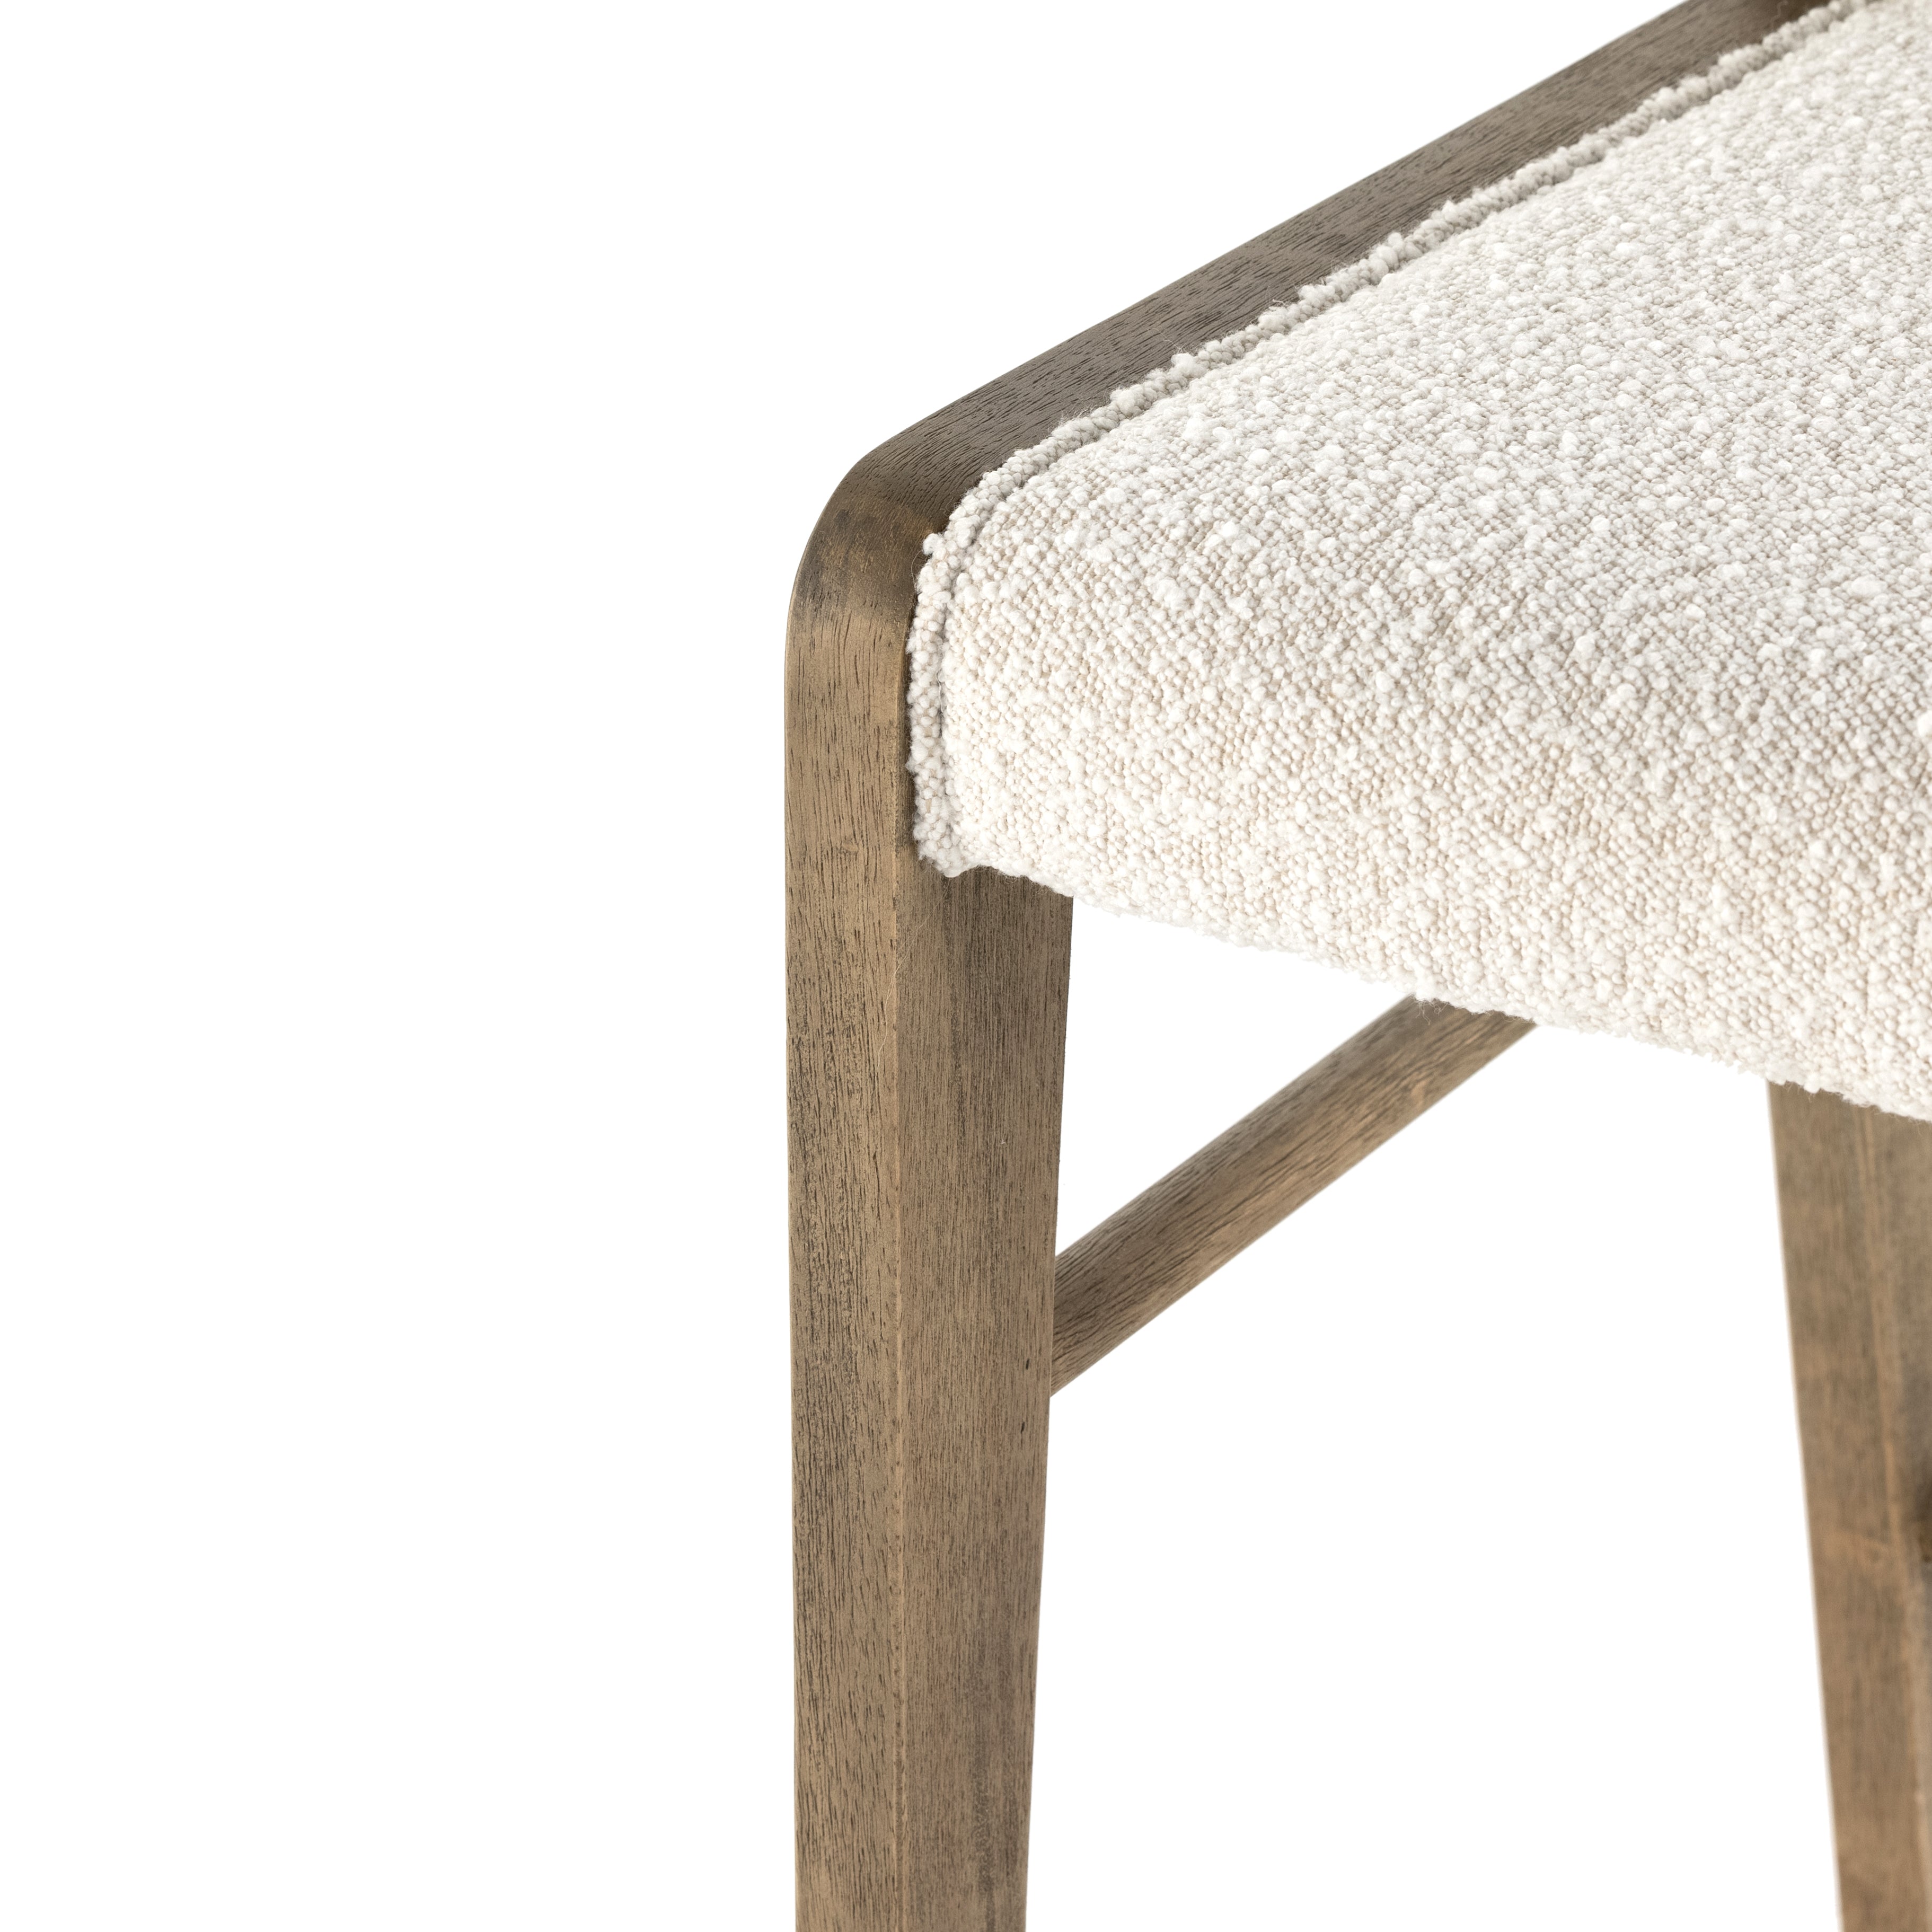 Knoll Natural Fabric with Weathered Drift Parawood (Counter Height) | Charon Bar/Counter Stool | Valley Ridge Furniture